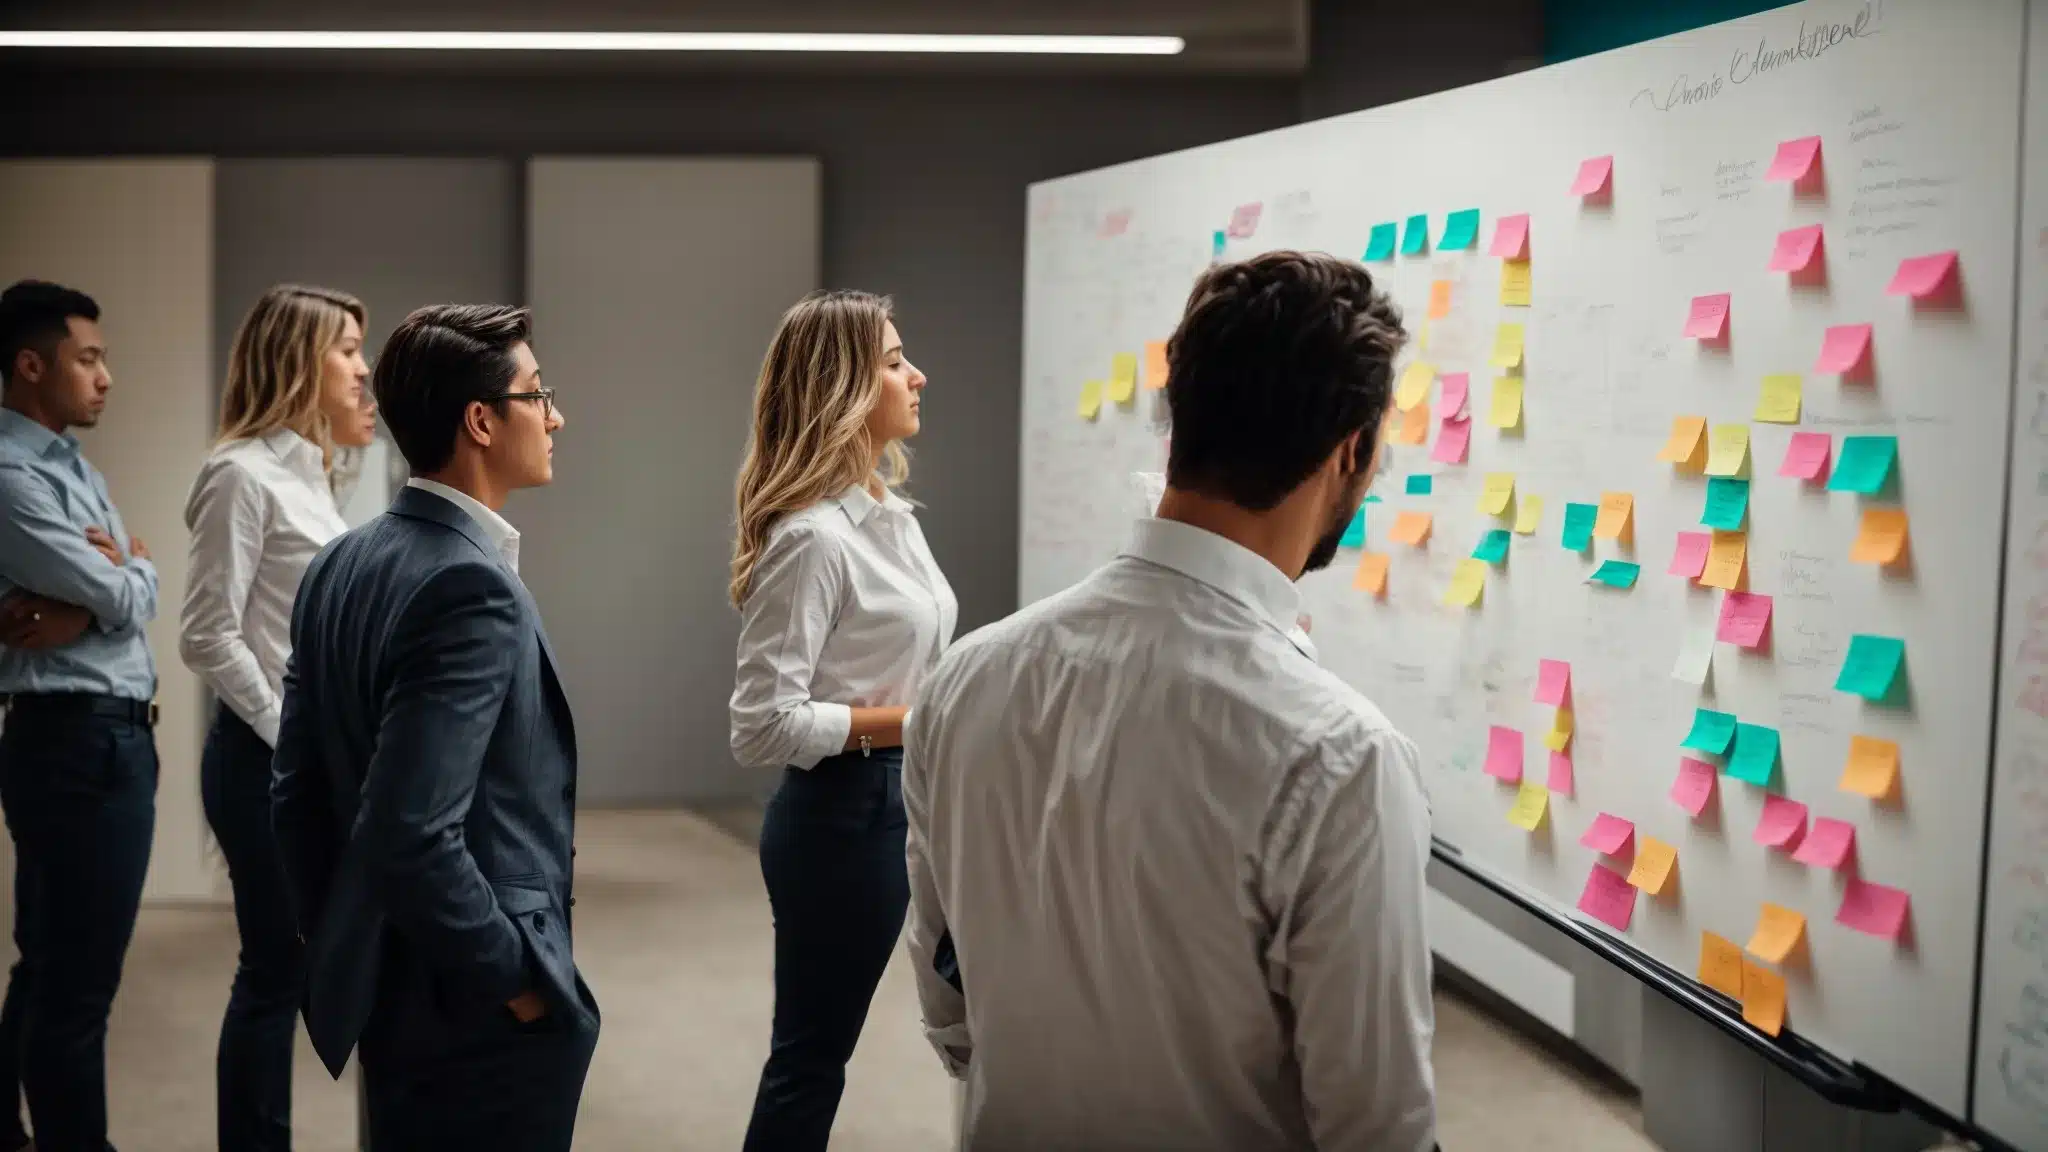 A Group Of Focused Marketers Brainstorming Around A Whiteboard With Colorful Sticky Notes And Diagrams Illustrating Brand Value Elements.